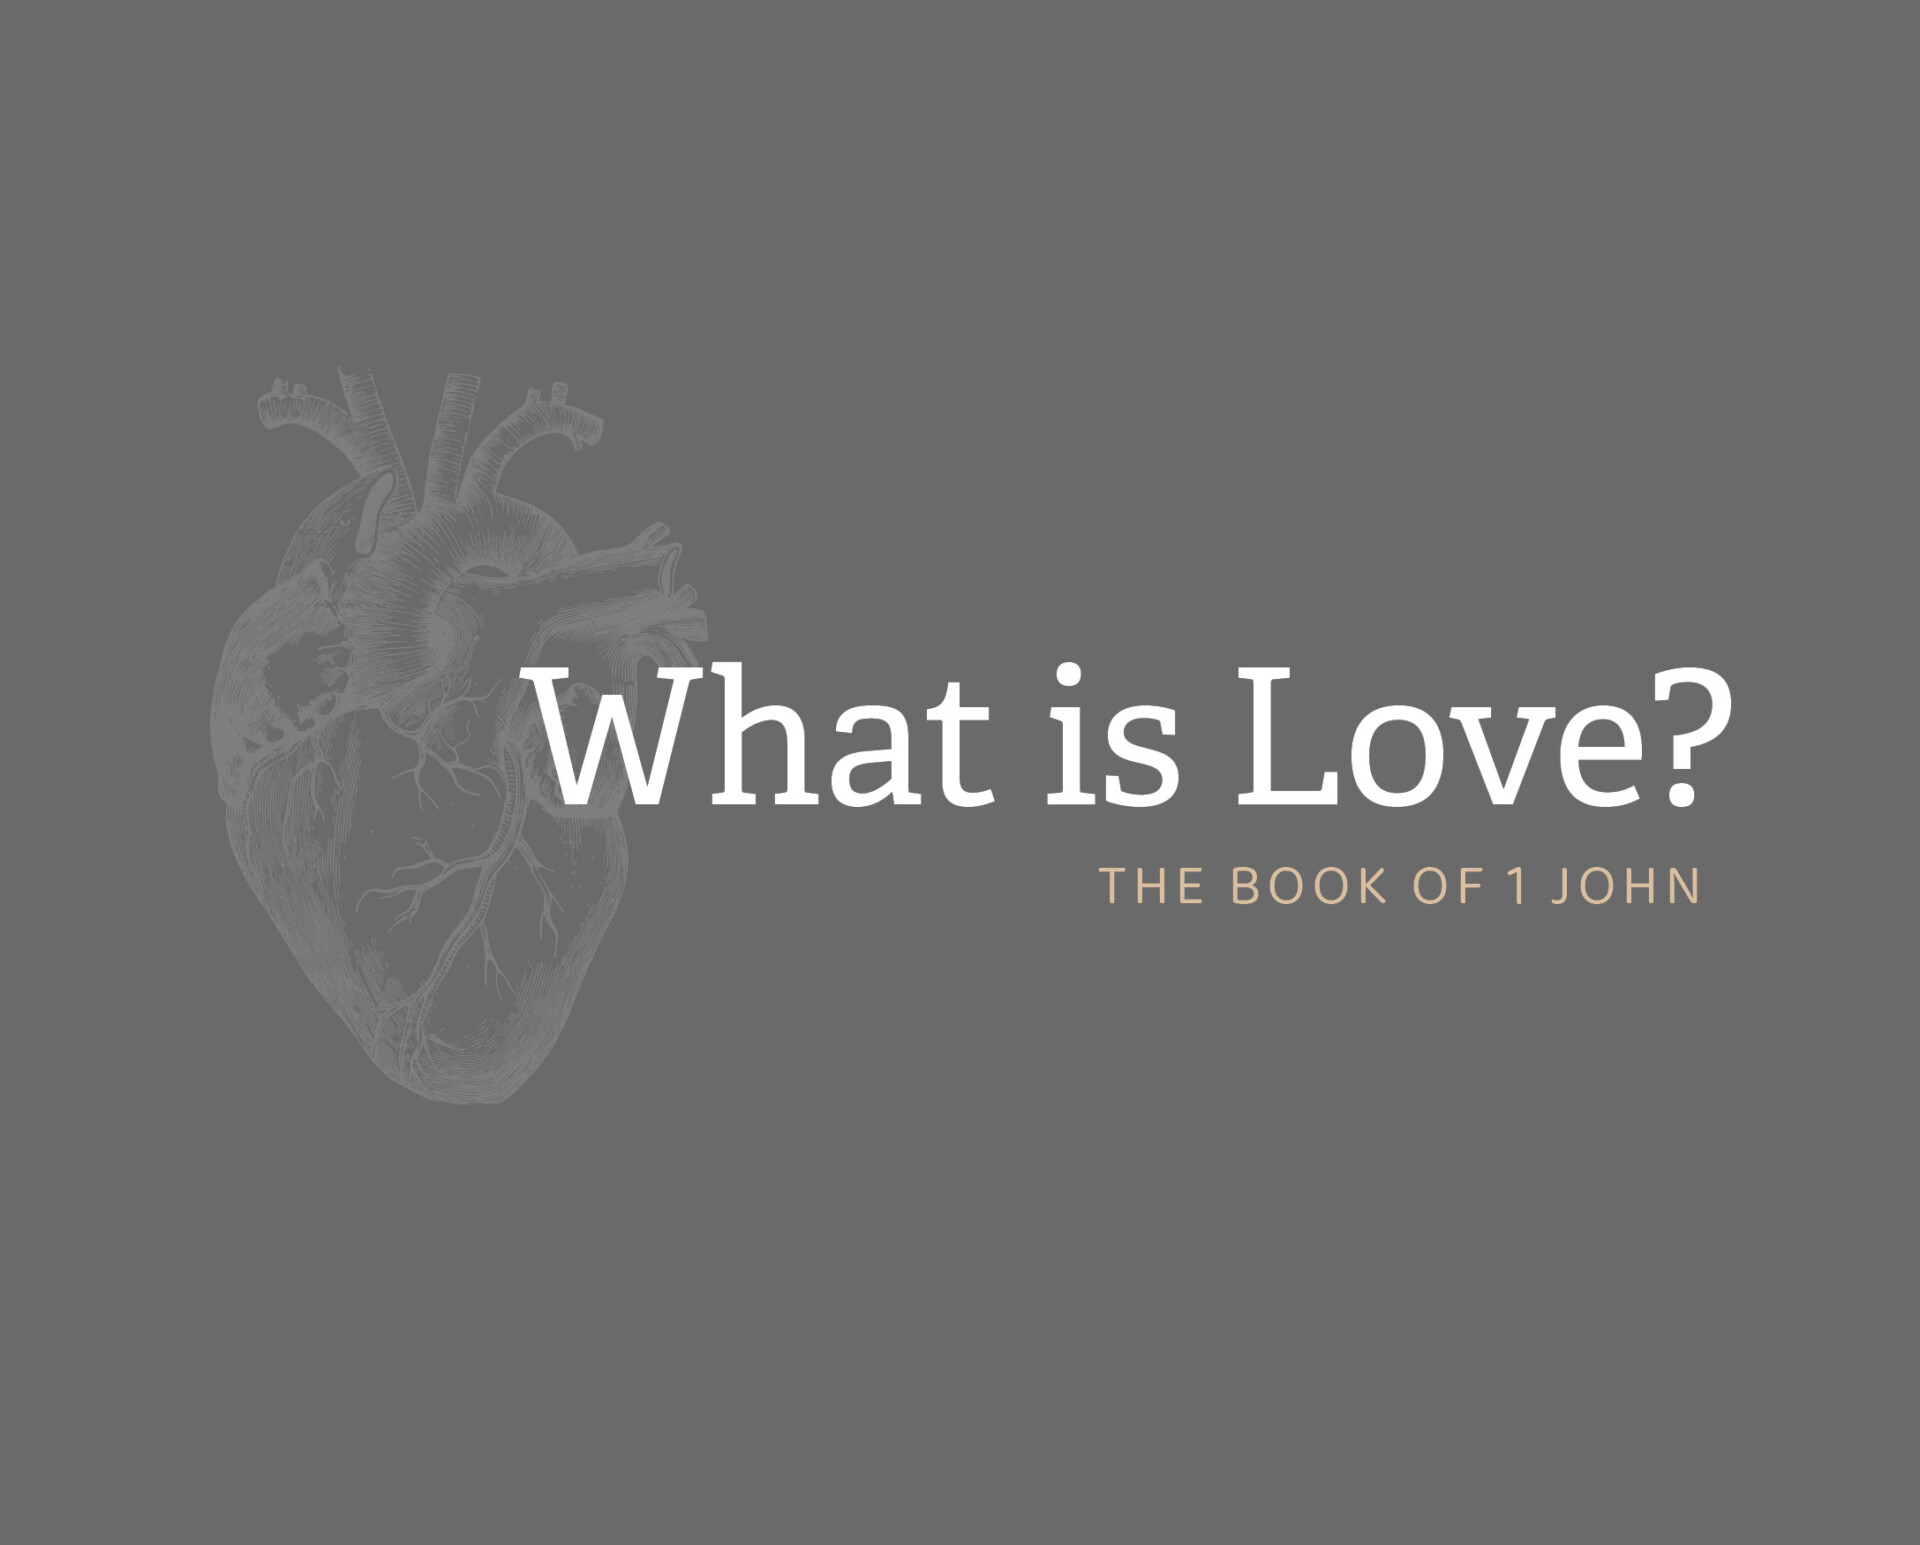 What Is Love? Test the Spirits